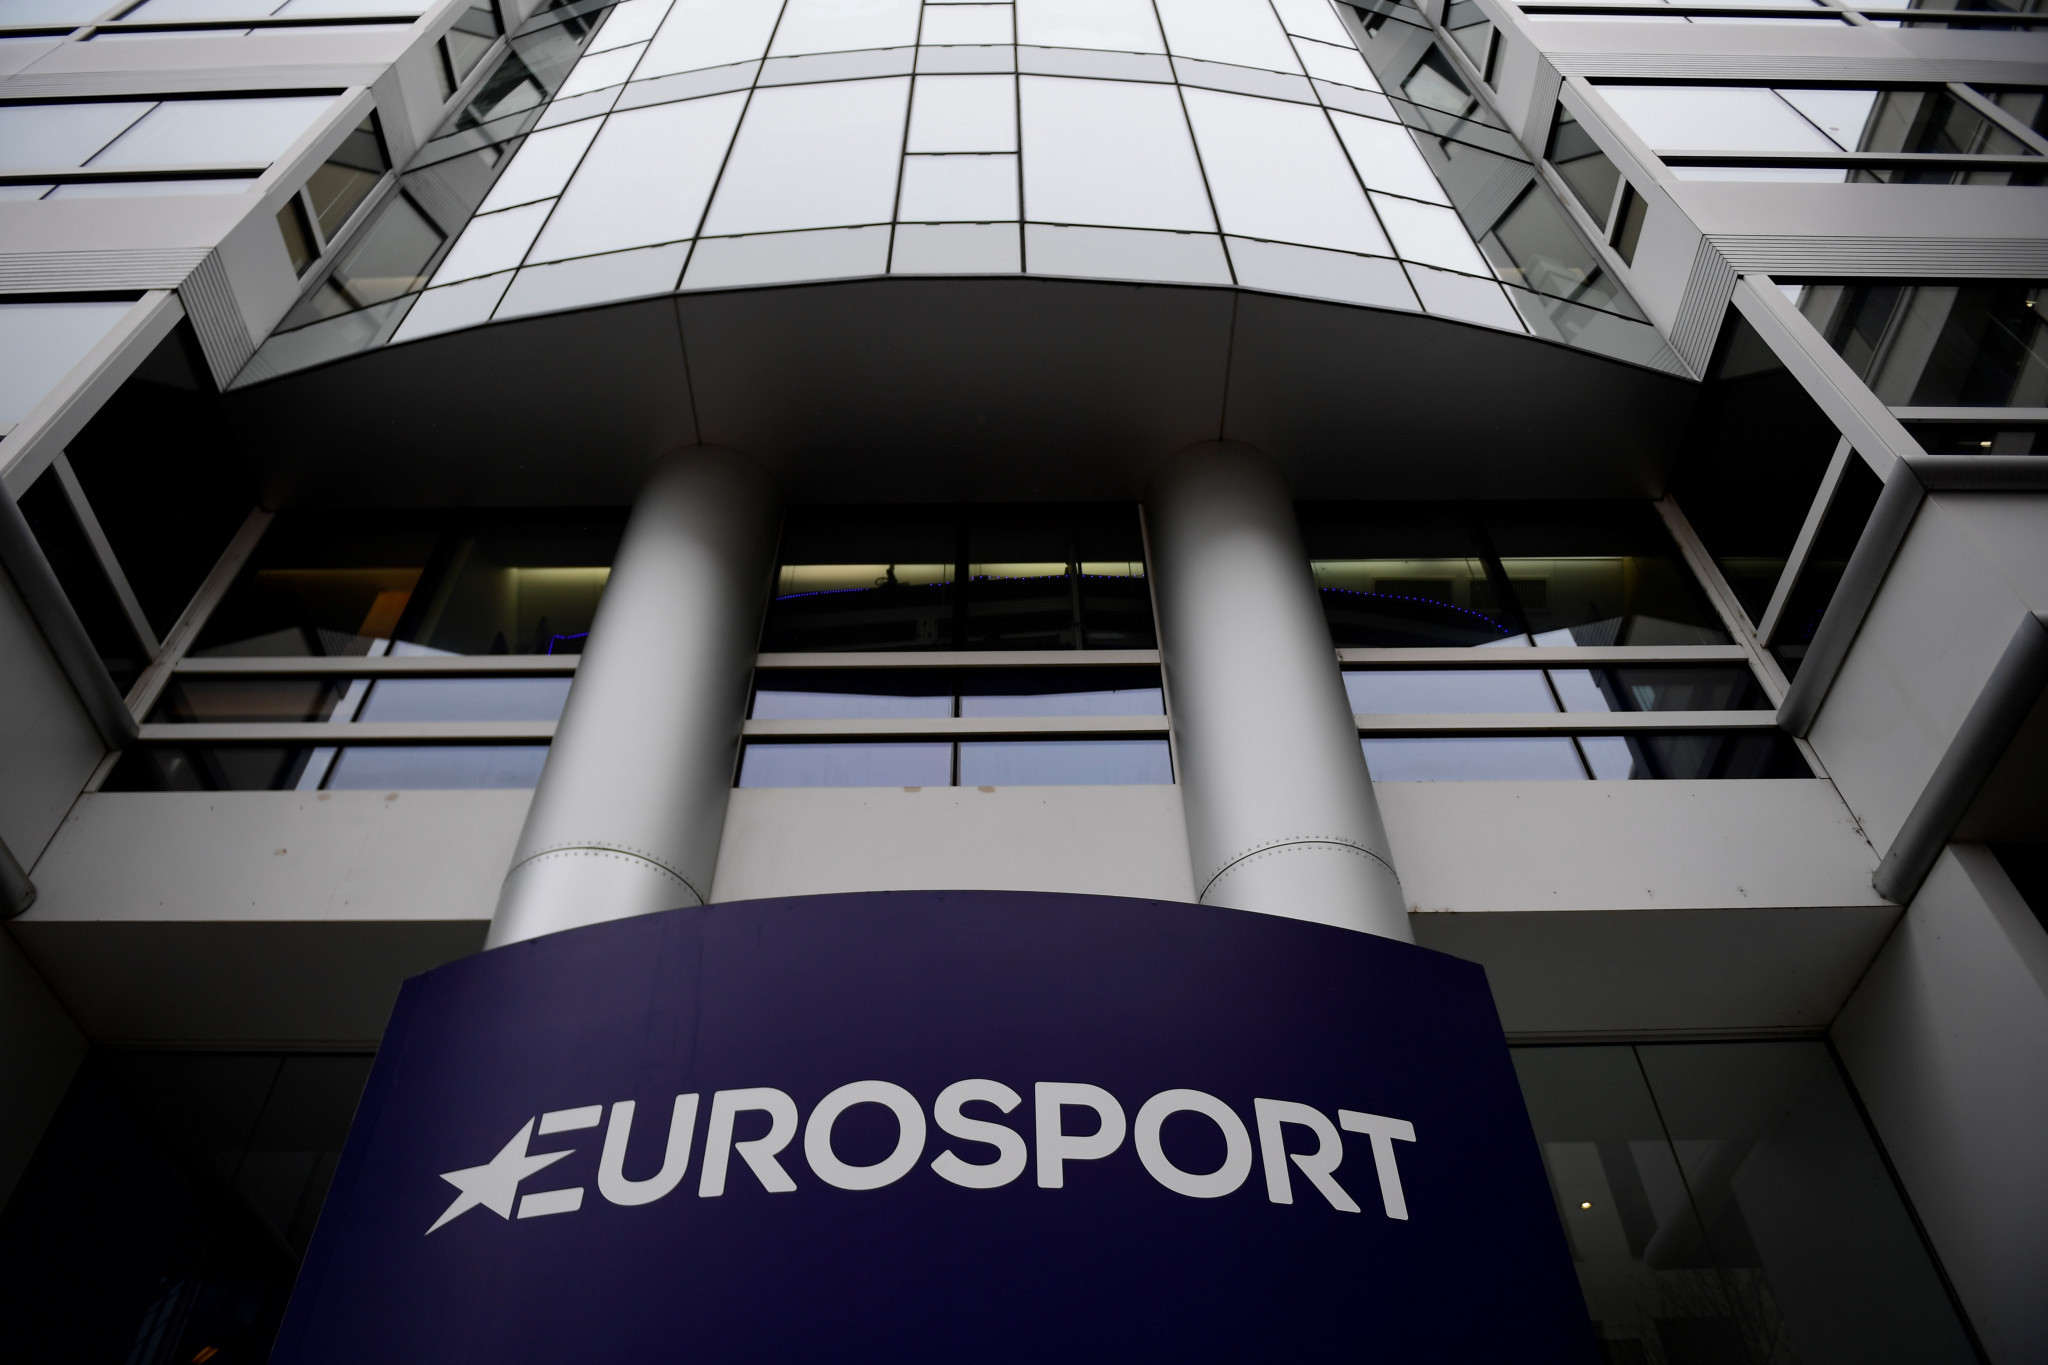 Eurosport has a wide-ranging Olympic deal running until Paris 2024 ©Getty Images